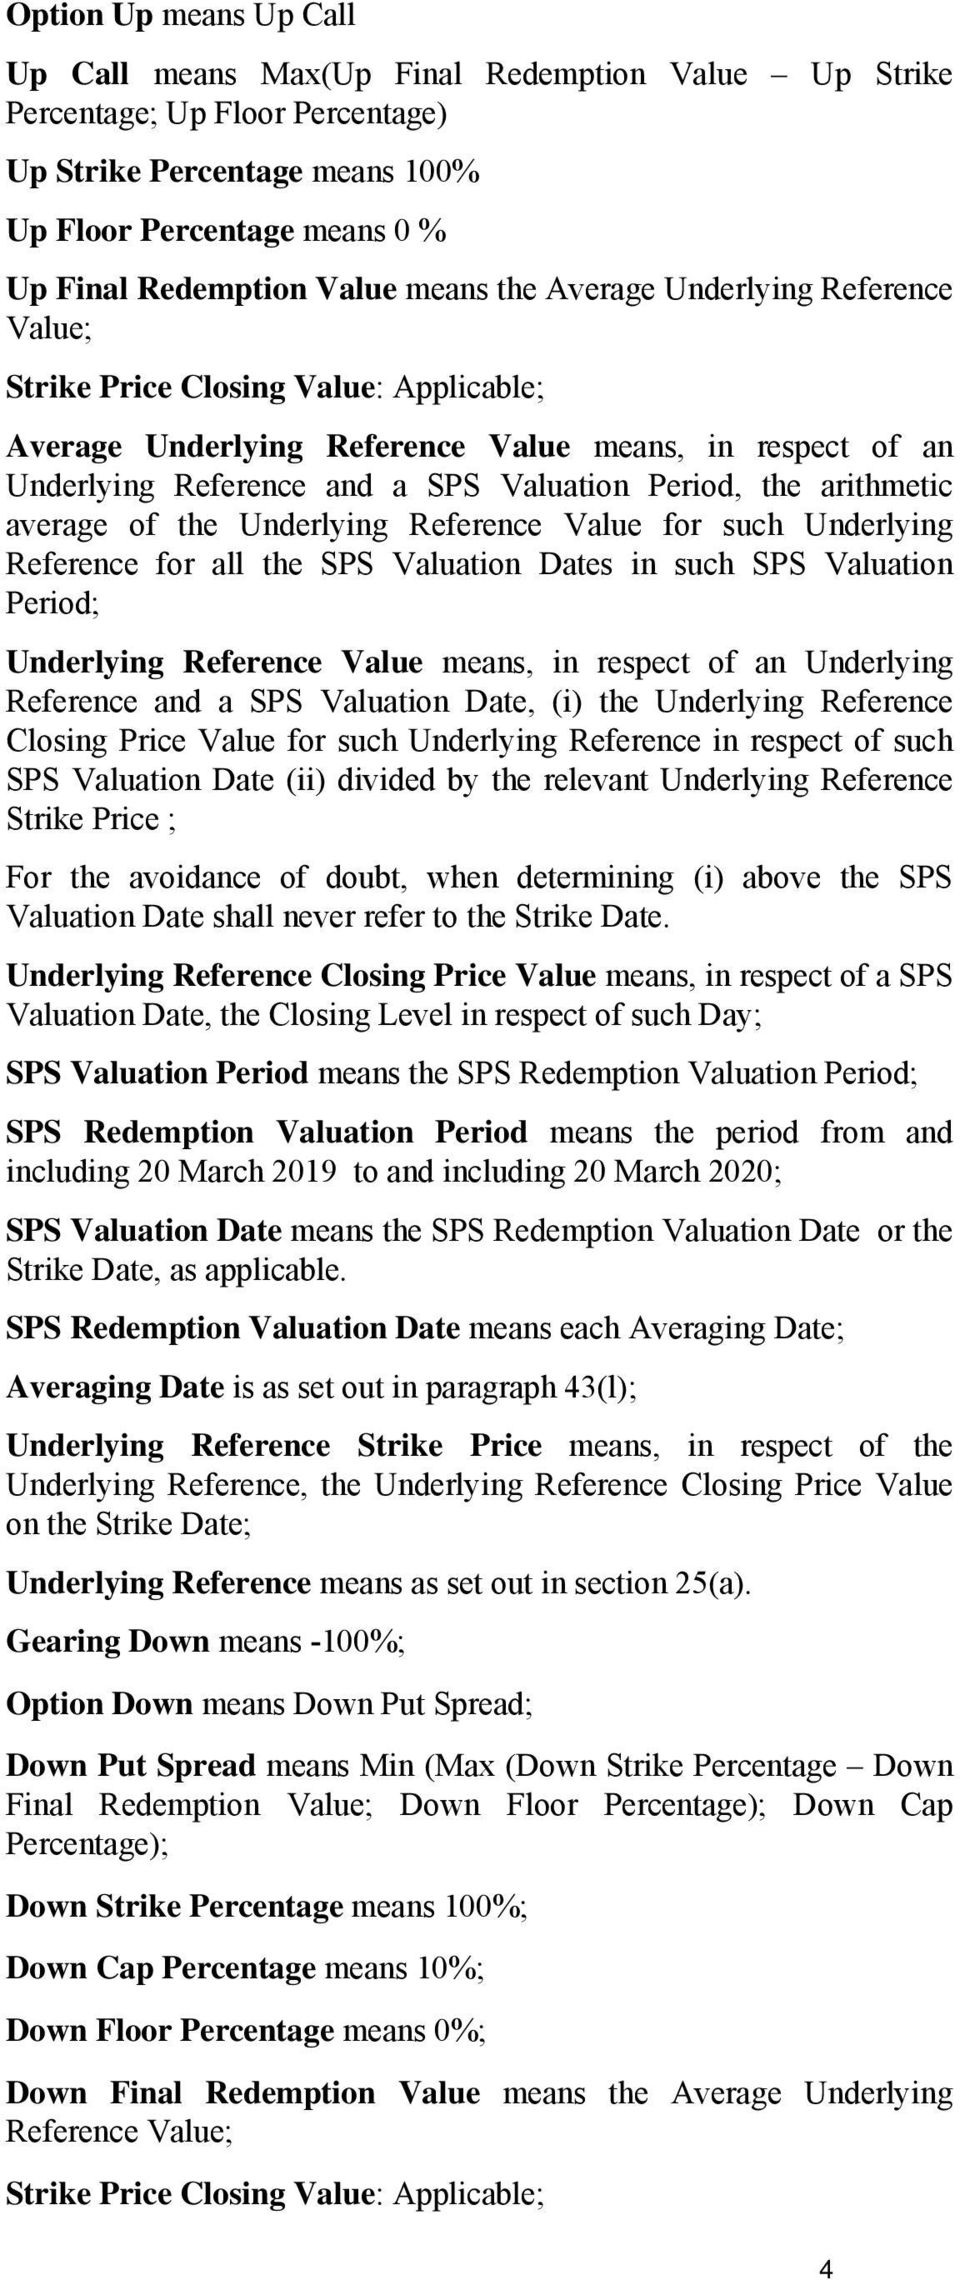 arithmetic average of the Underlying Reference Value for such Underlying Reference for all the SPS Valuation Dates in such SPS Valuation Period; Underlying Reference Value means, in respect of an